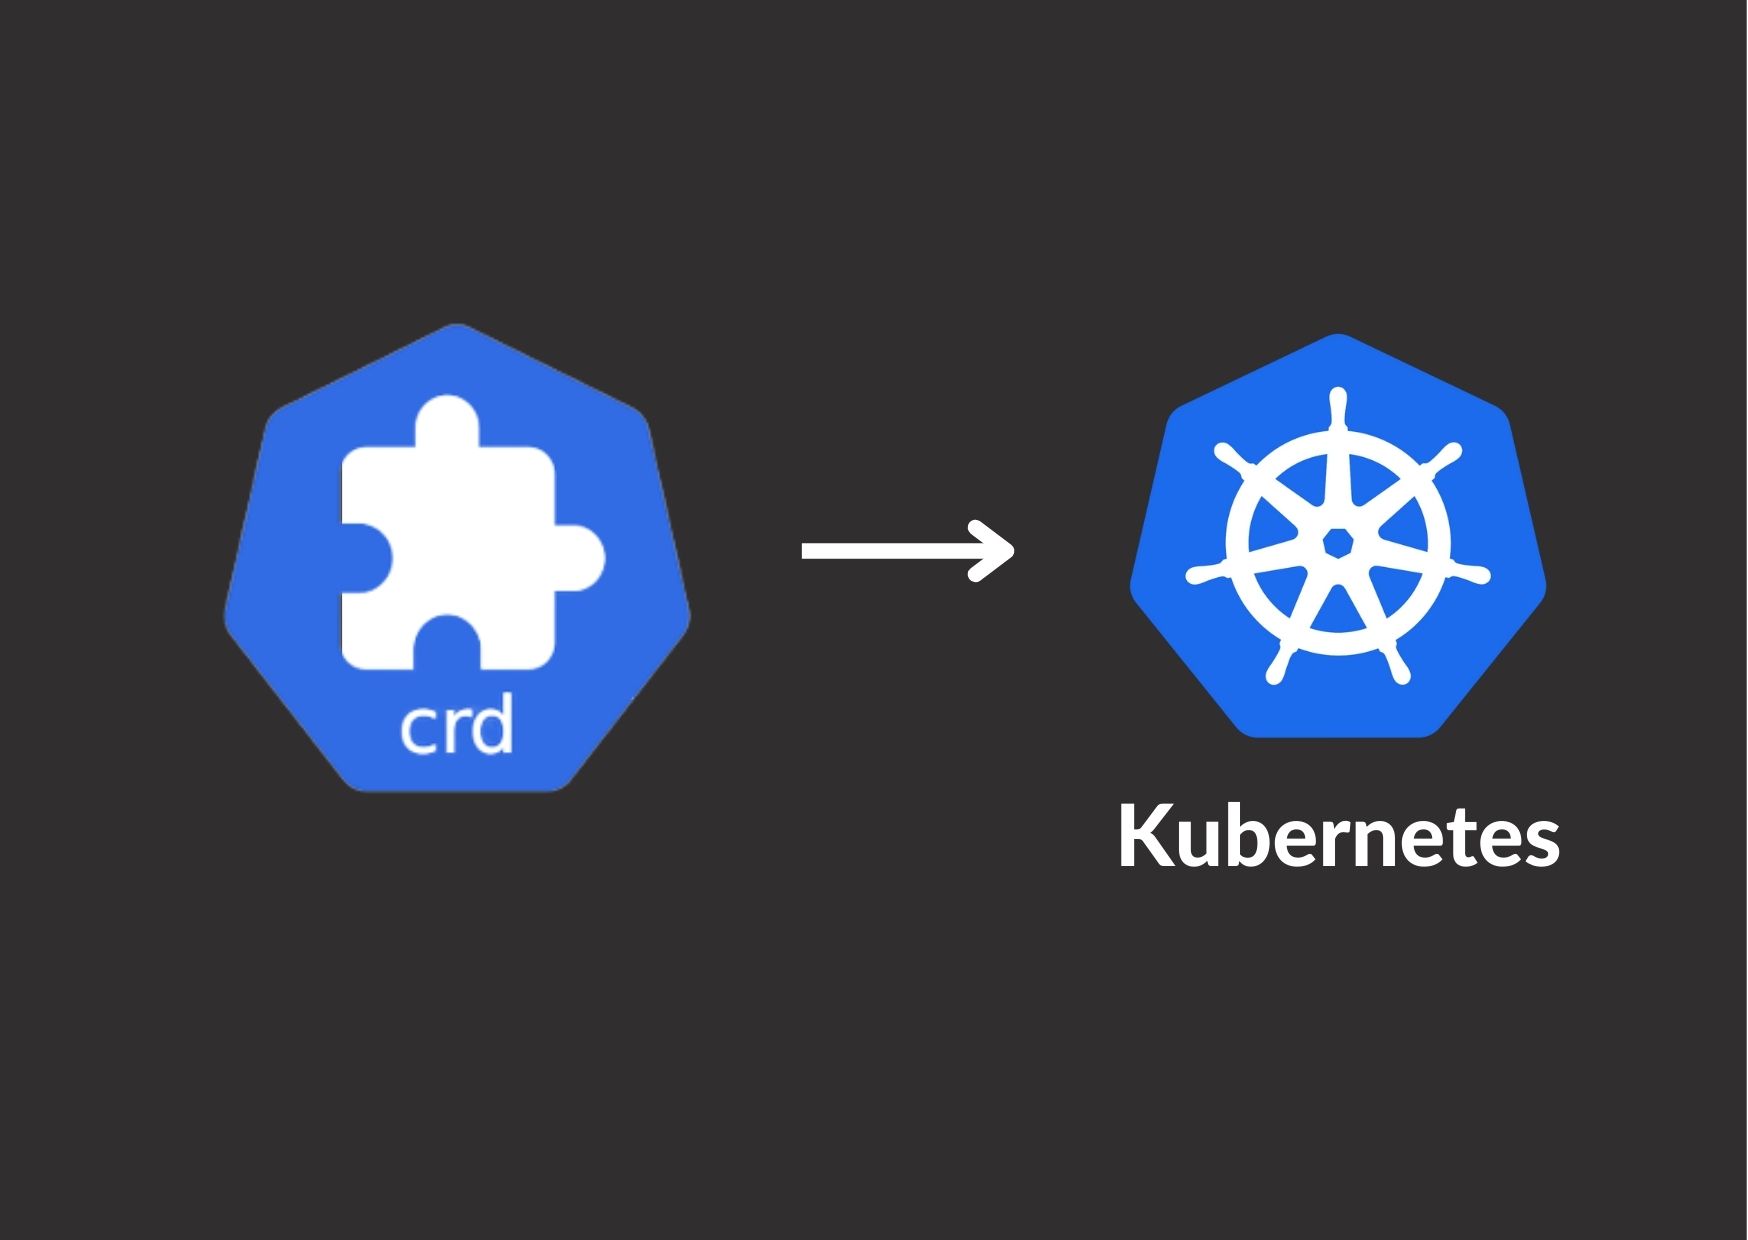 Part 1: How to Create a Kubernetes Custom Resource Definition (CRD)